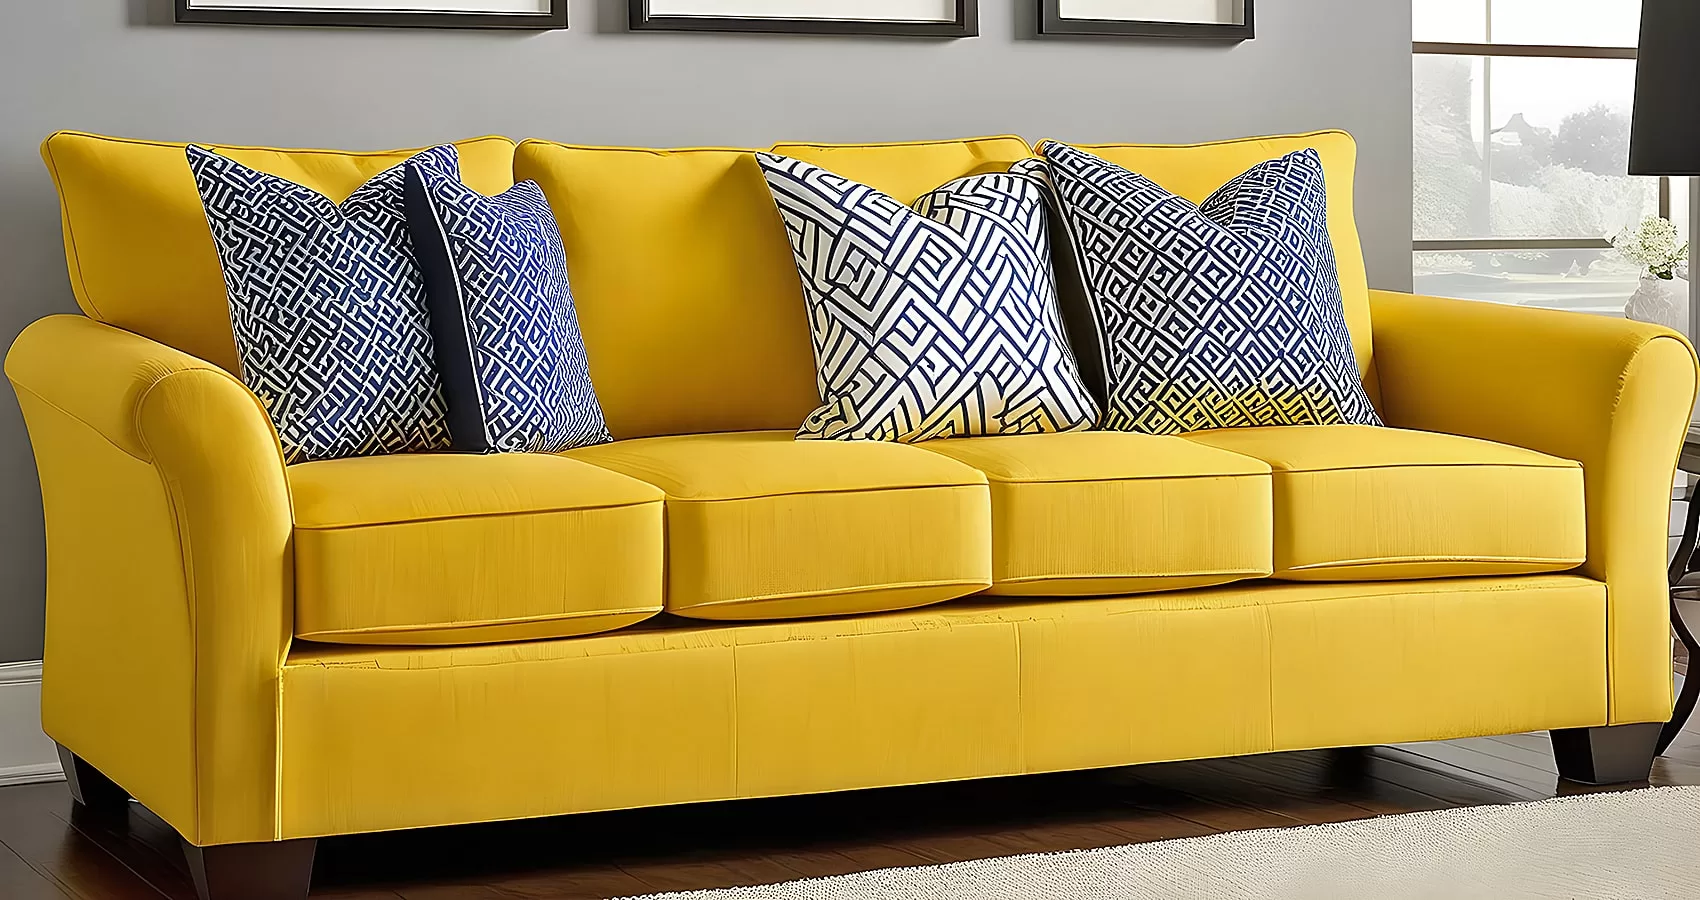 Yellow Couch Pillows | Yellow Sofa Pillows: Styling with Comfort